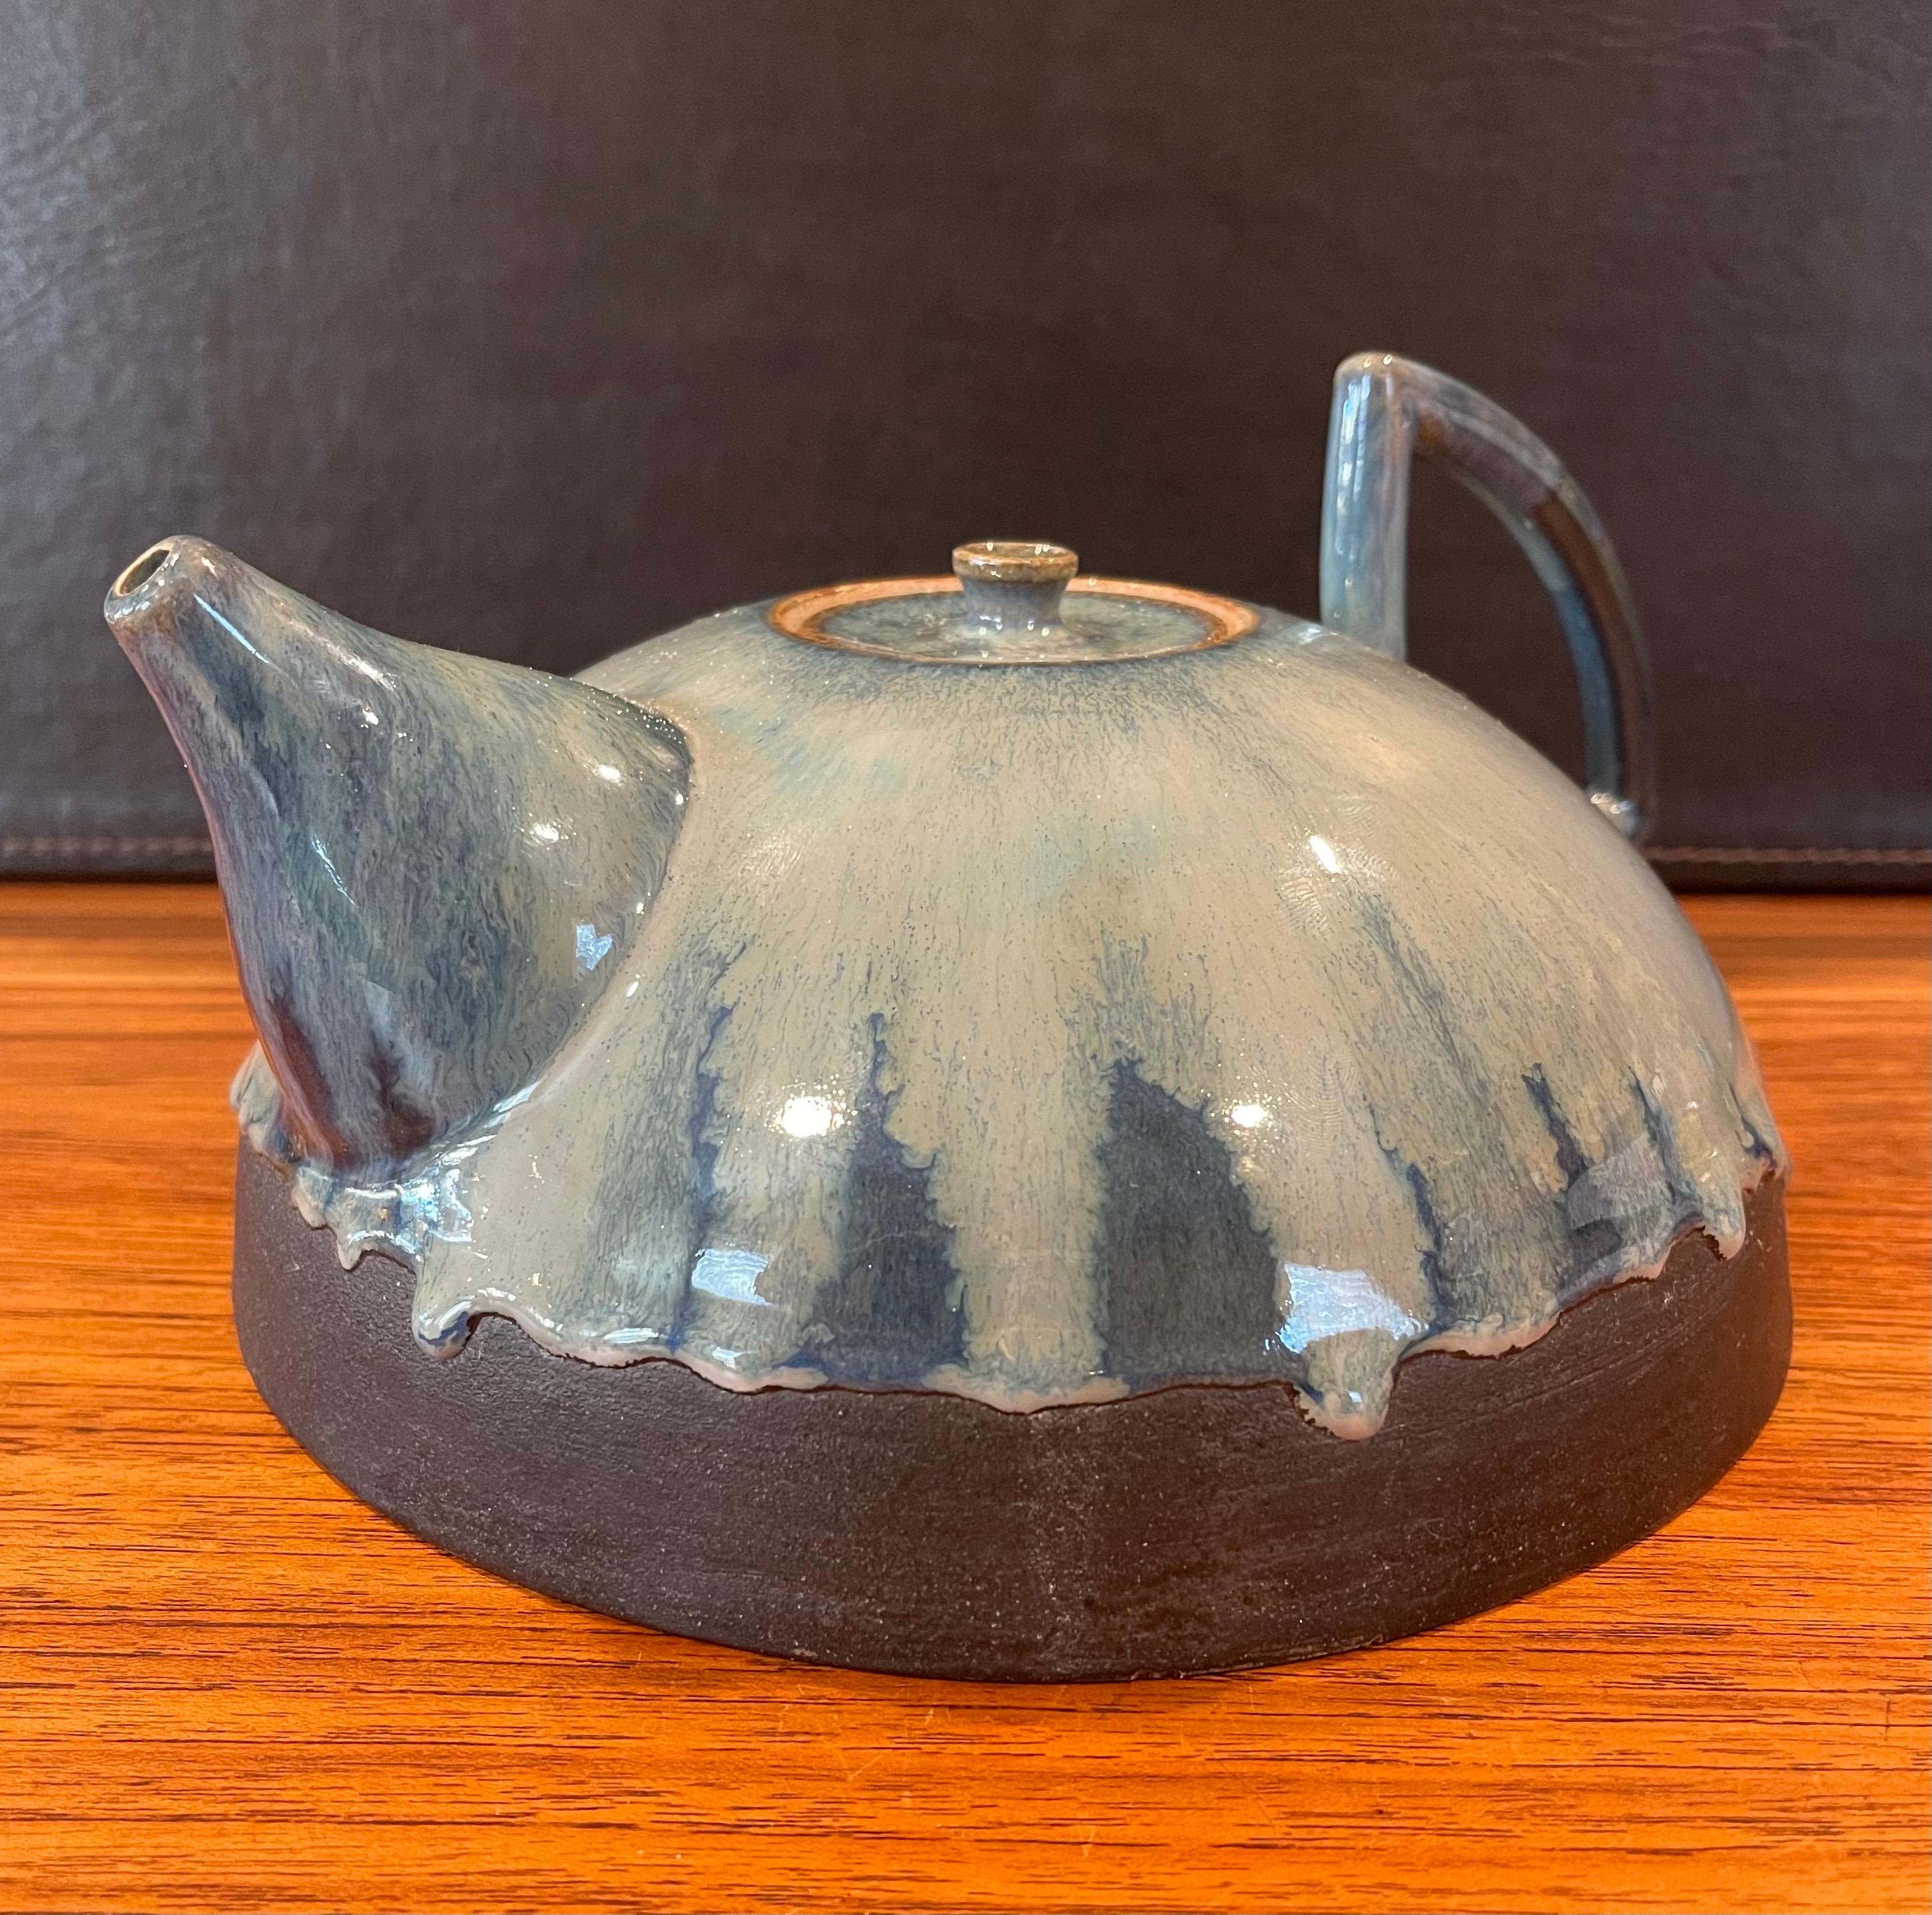 Mid-century studio pottery tea pot with blue lava glaze, circa 1970s. The pot is in very good vintage with no chips or cracks and measures 11